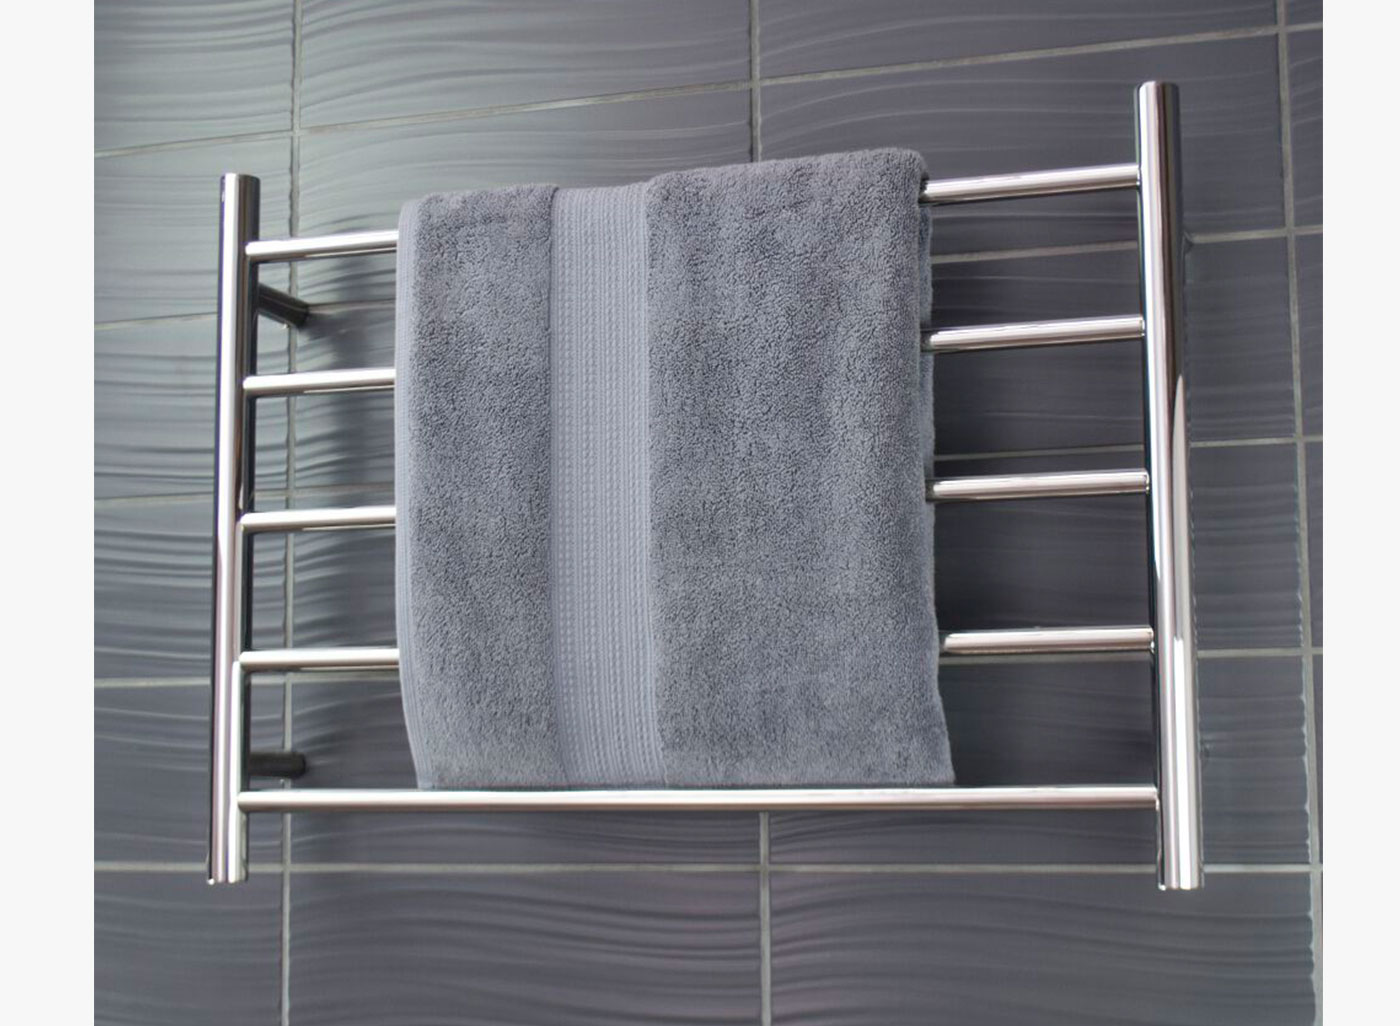 including round bar and square bar models. these towel rails are a quality addition to any bathroom and are easy to install as there is no electrical wiring required.